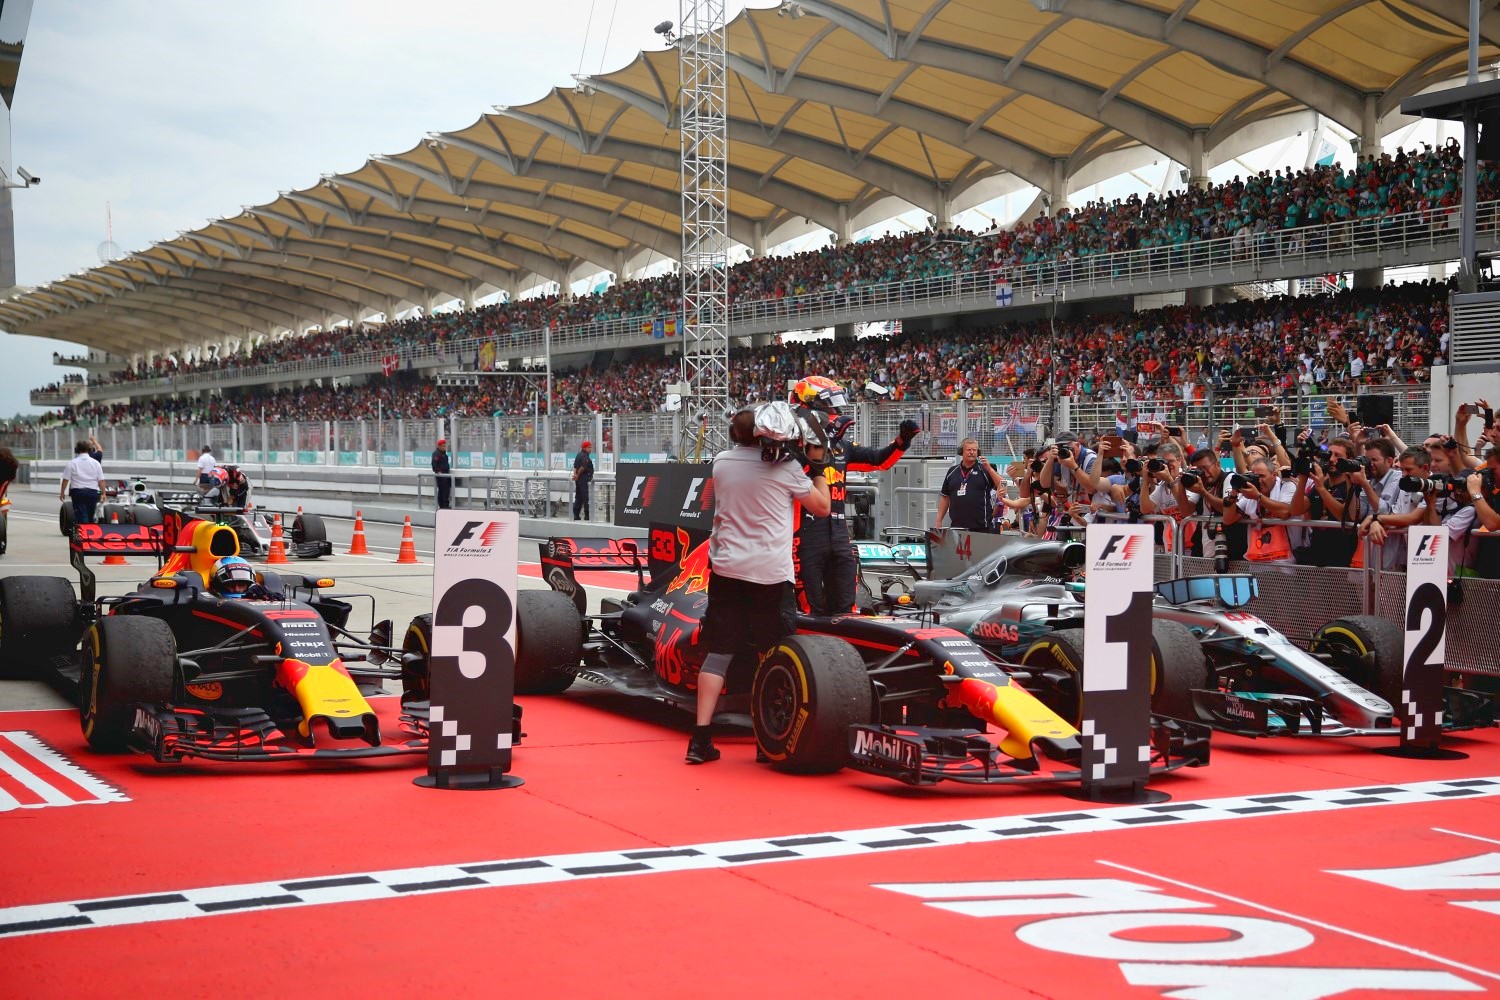 Race winner Max Verstappen of Netherlands and Red Bull Racing, second place finisher Lewis Hamilton of Great Britain and Mercedes GP and third place finisher Daniel Ricciardo of Australia and Red Bull Racing in parc ferme during the Malaysia Formula One Grand Prix at Sepang Circuit on October 1, 2017 in Kuala Lumpur, Malaysia. (Photo by Will Taylor-Medhurst/Getty Images)